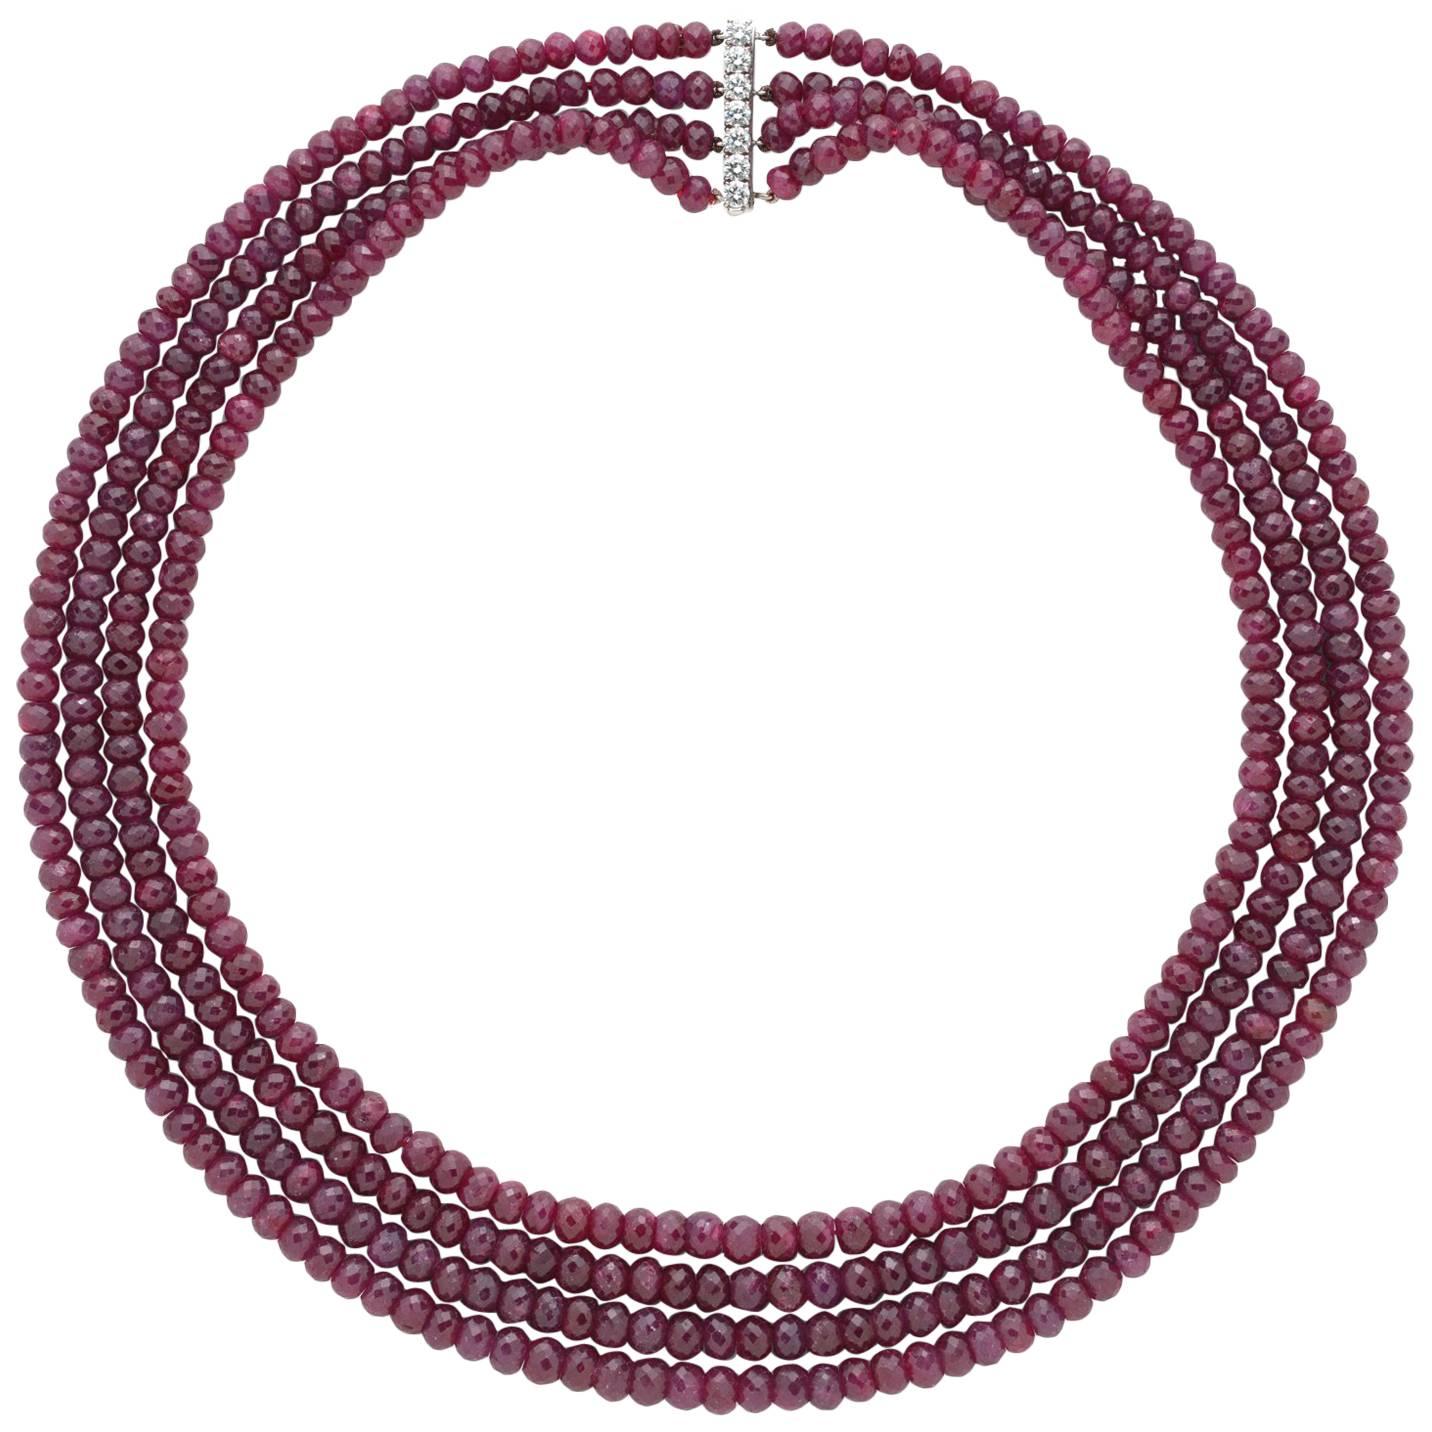 Ruby Necklace on Rare Van Cleef & Arpels Diamond Clasp